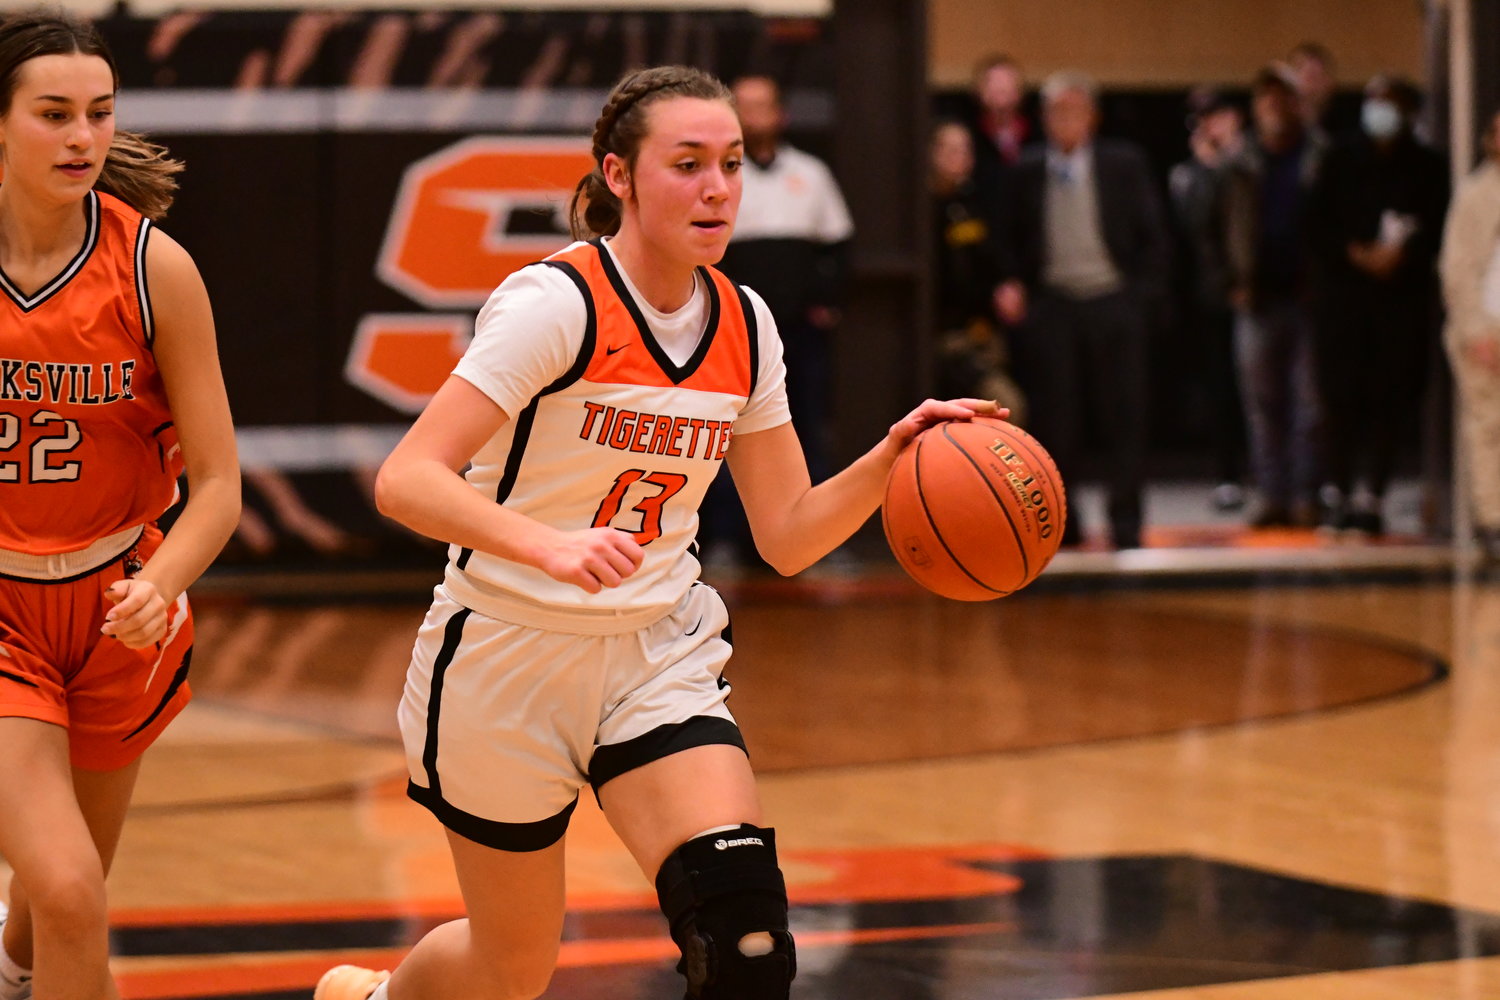 Macon's Lexi Miller dribbles during the Macon Invitational title game against Kirksville.